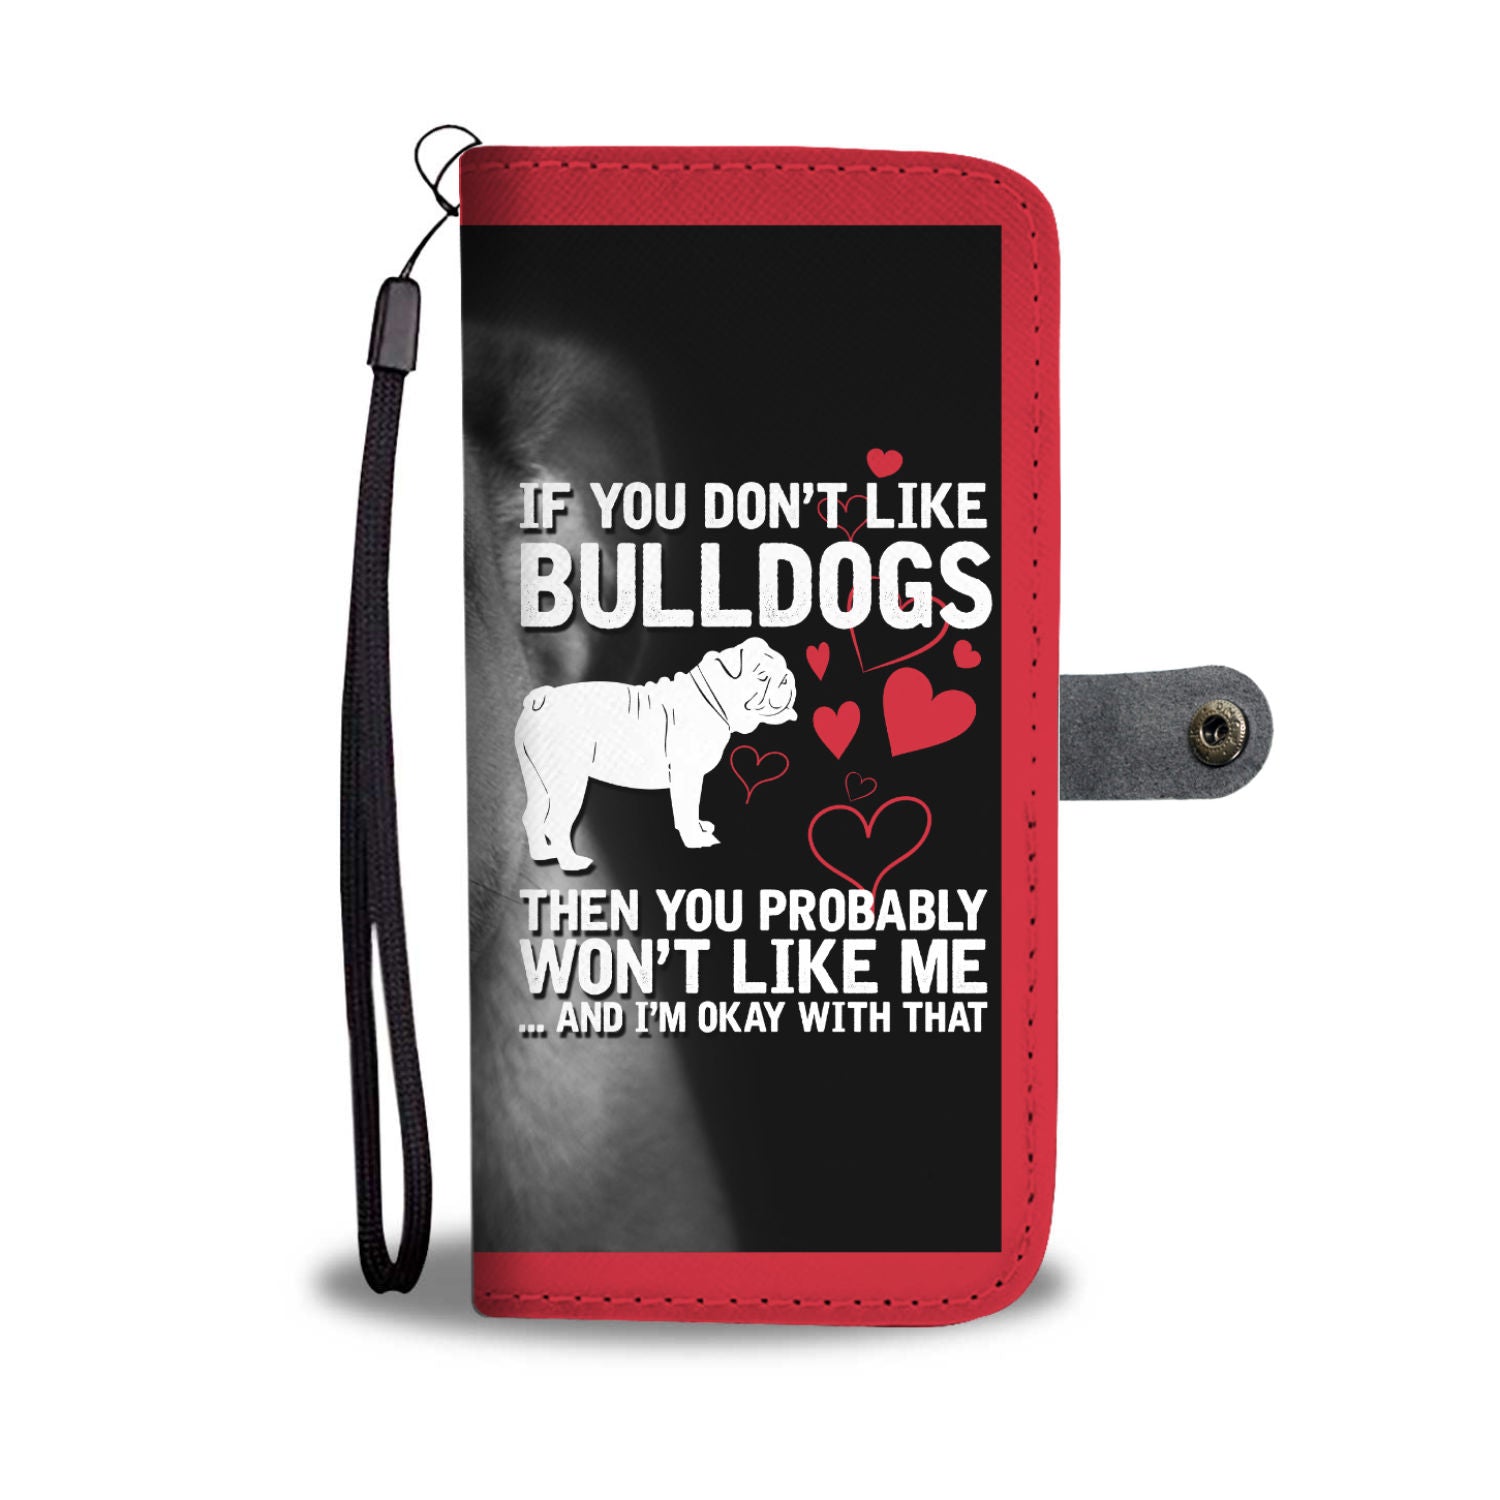 If You Don't Like Bulldogs Wallet Phone Case